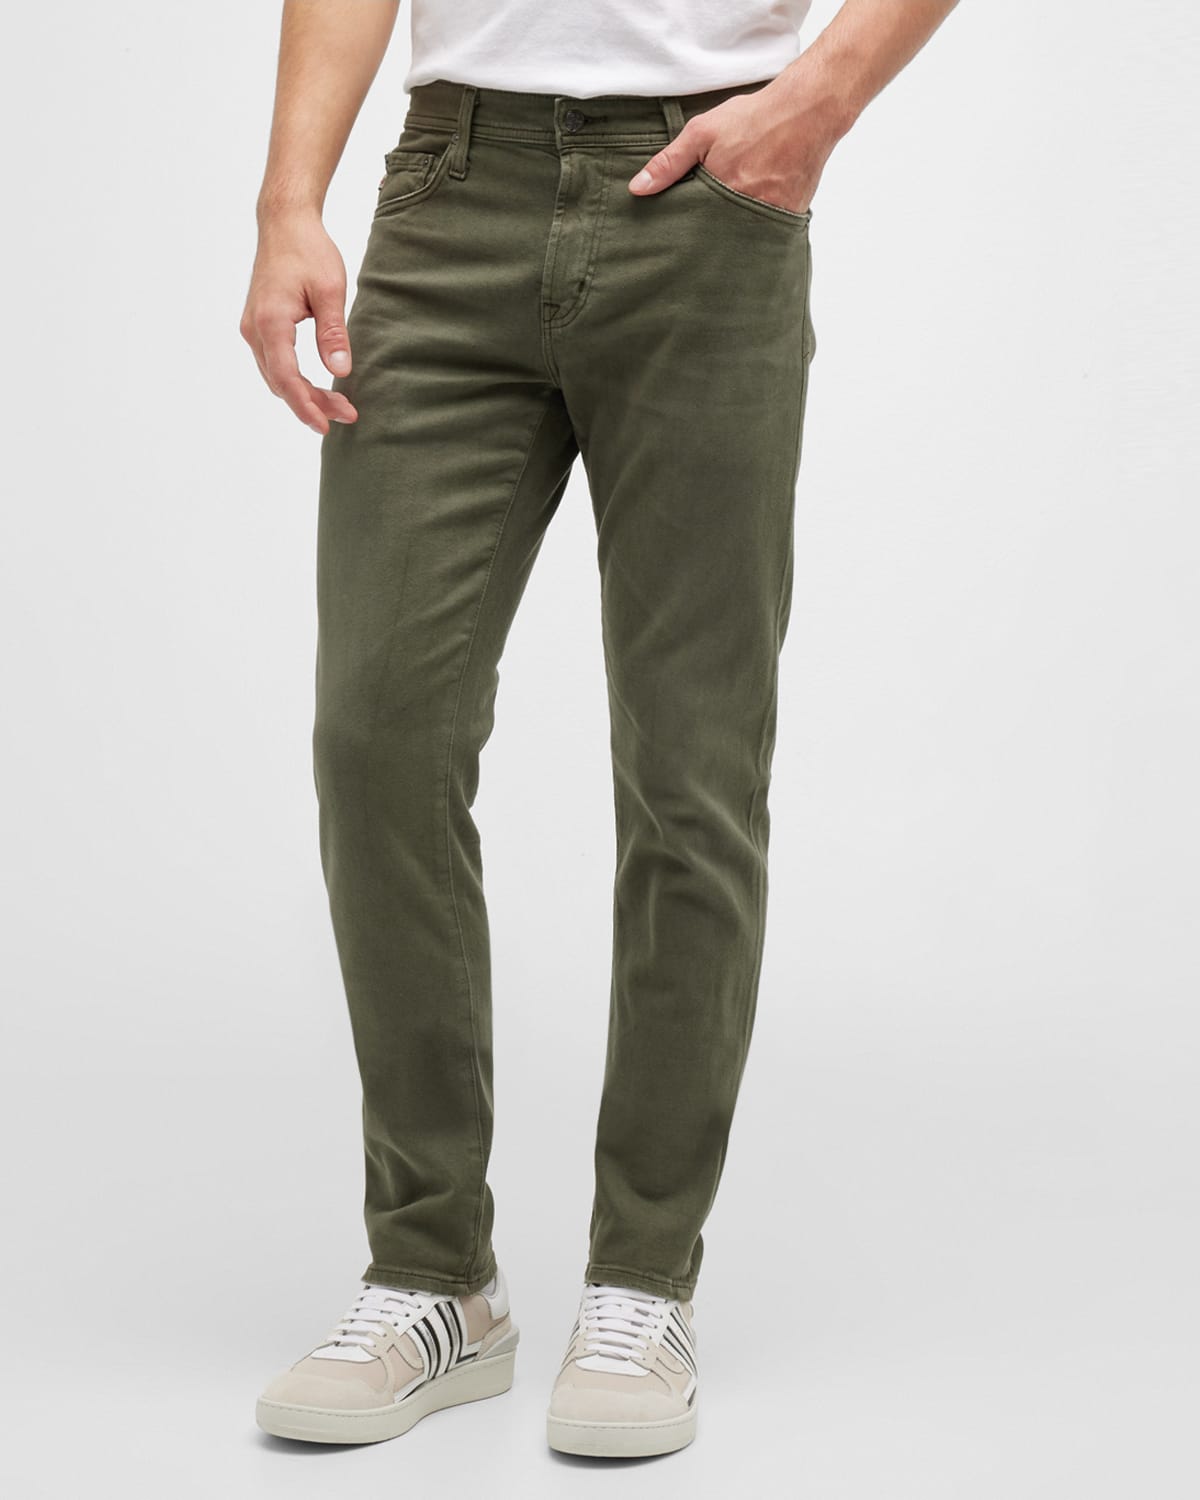 AG Adriano Goldschmied Men's Tellis Tapered Jeans